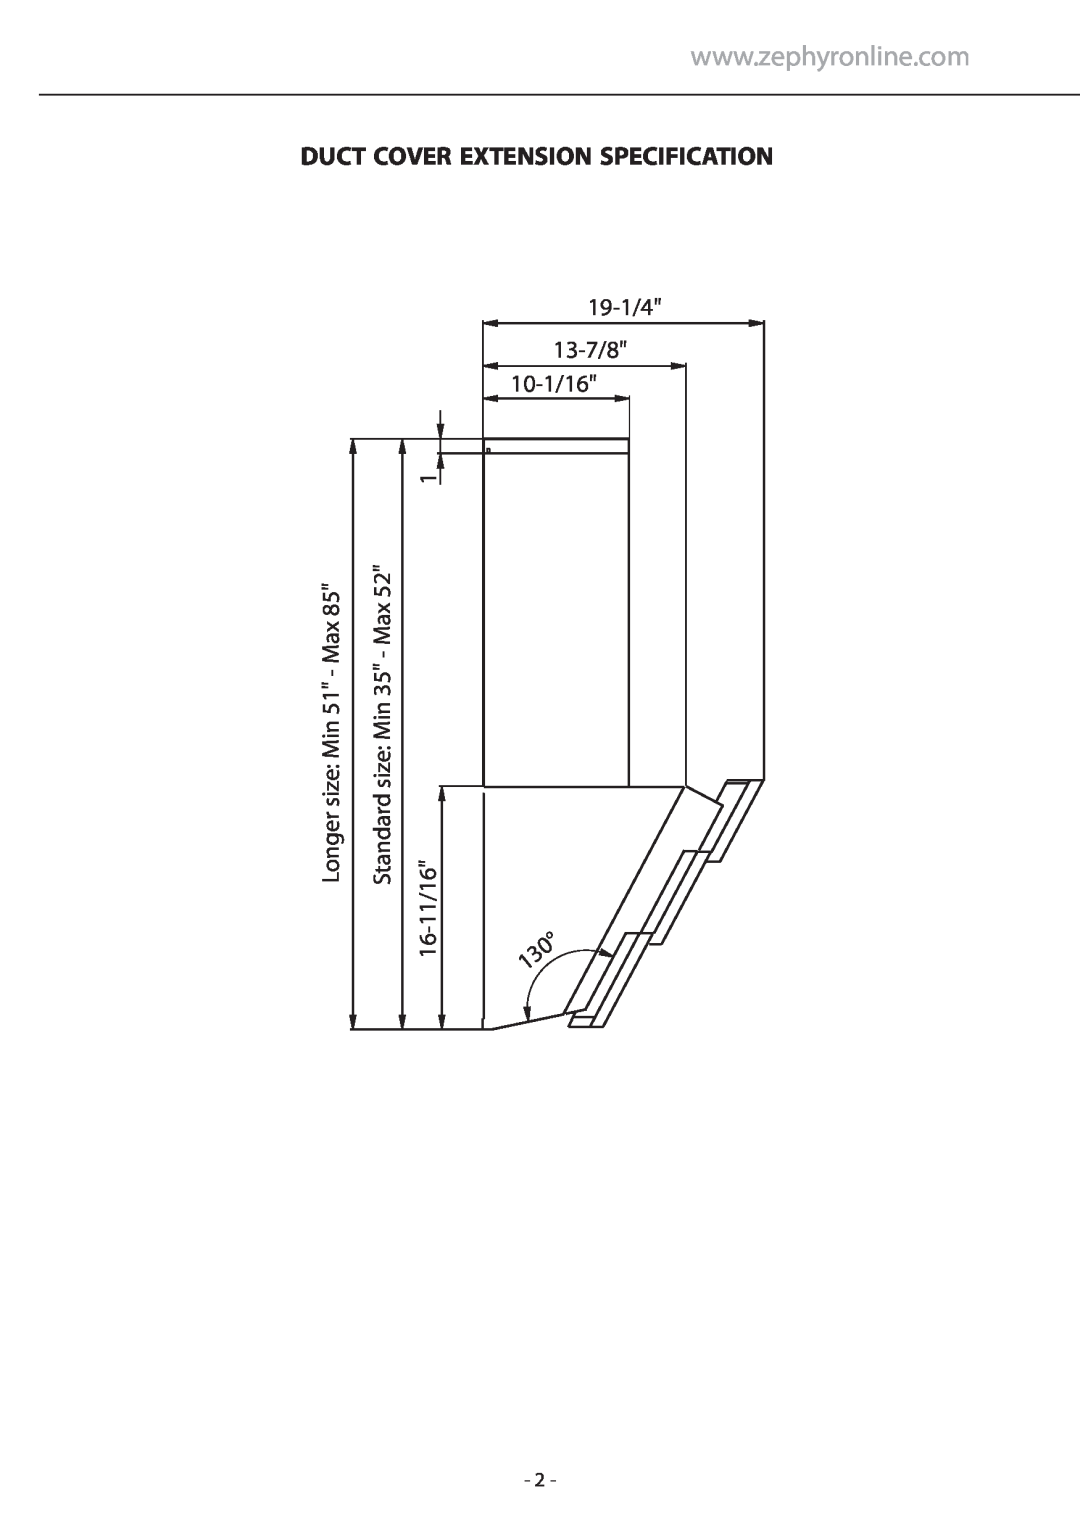 Zephyr Z1C-01TI, Z1C-00TI manual Duct Cover Extension Specification 